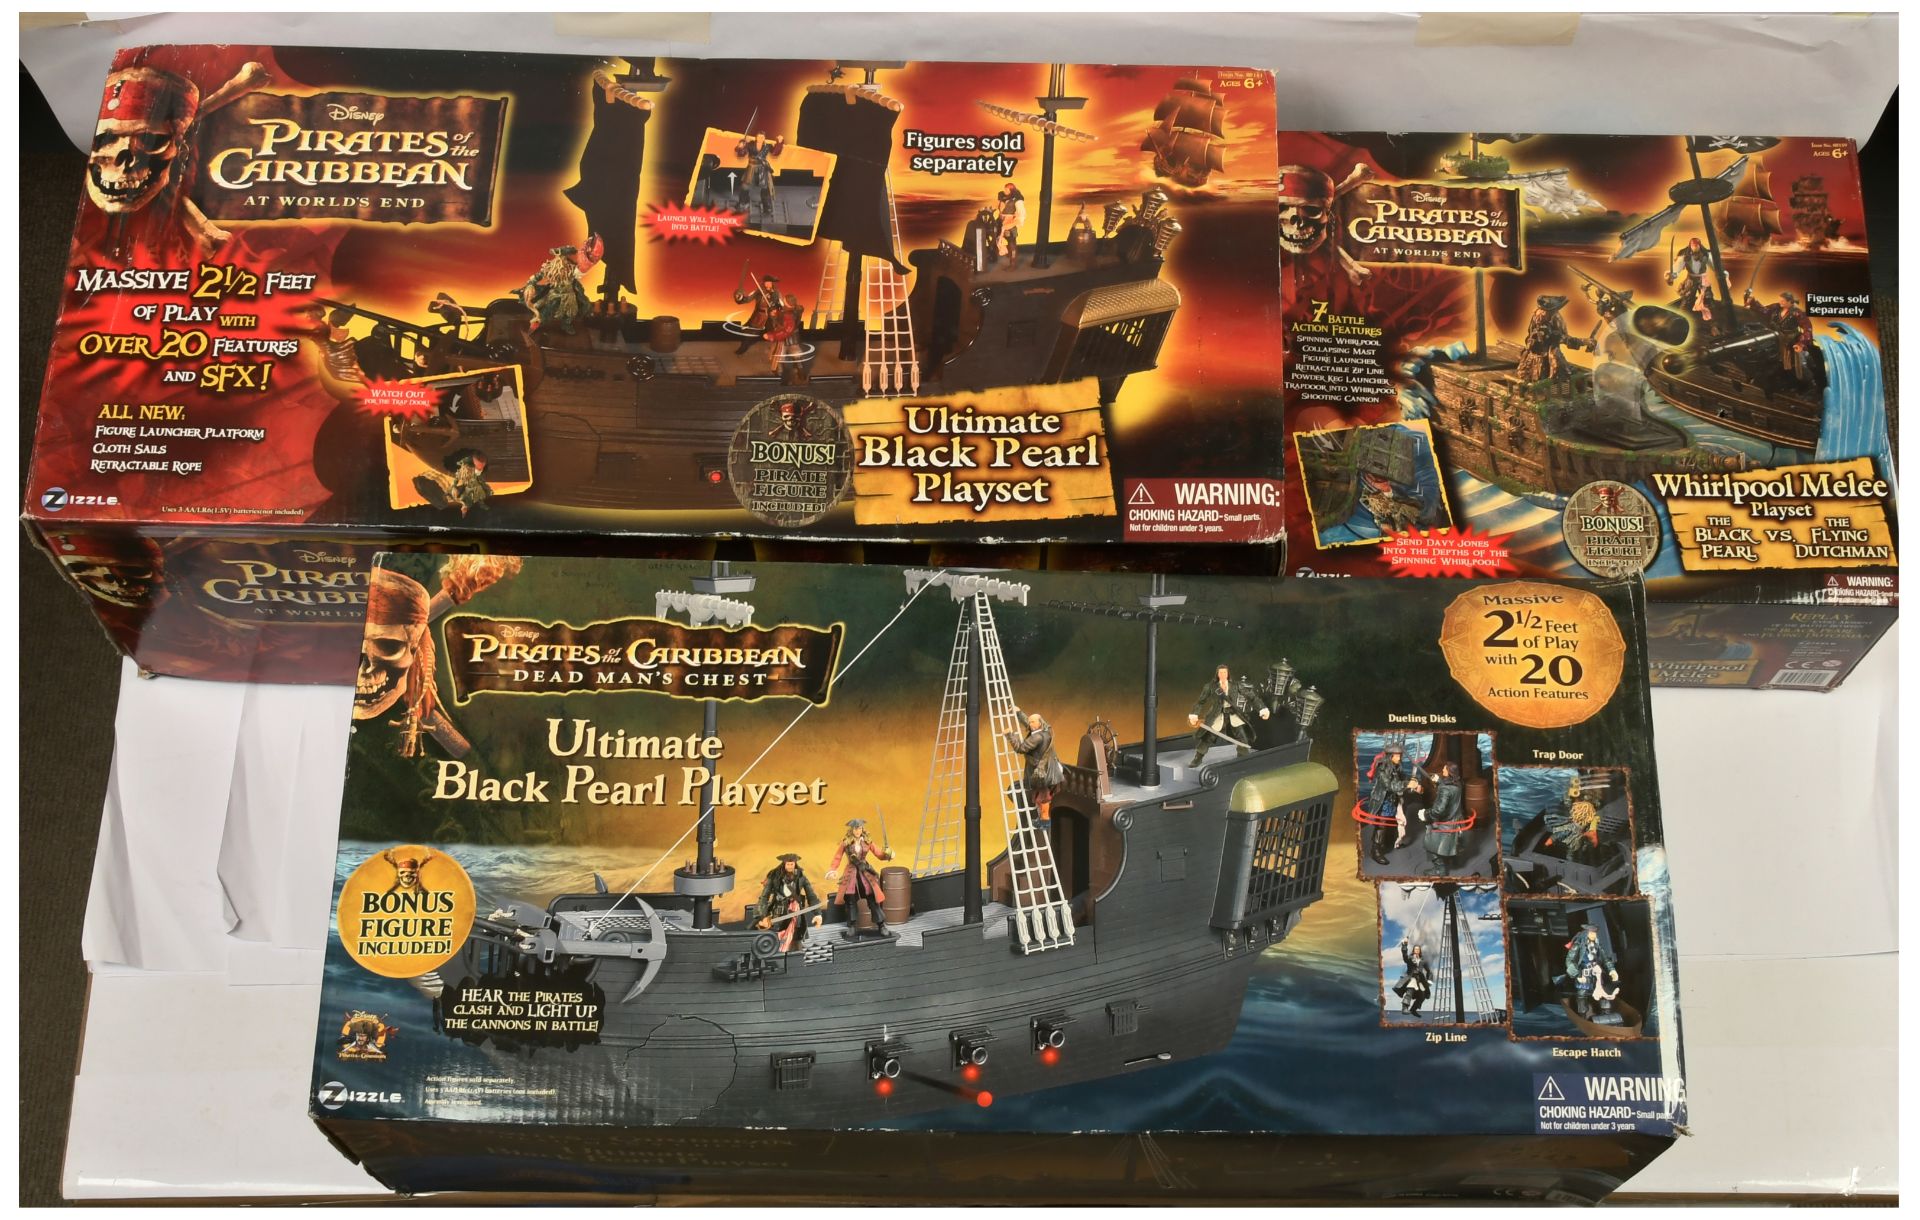 Zizzle The Pirates of the Caribbean ship playsets x 3